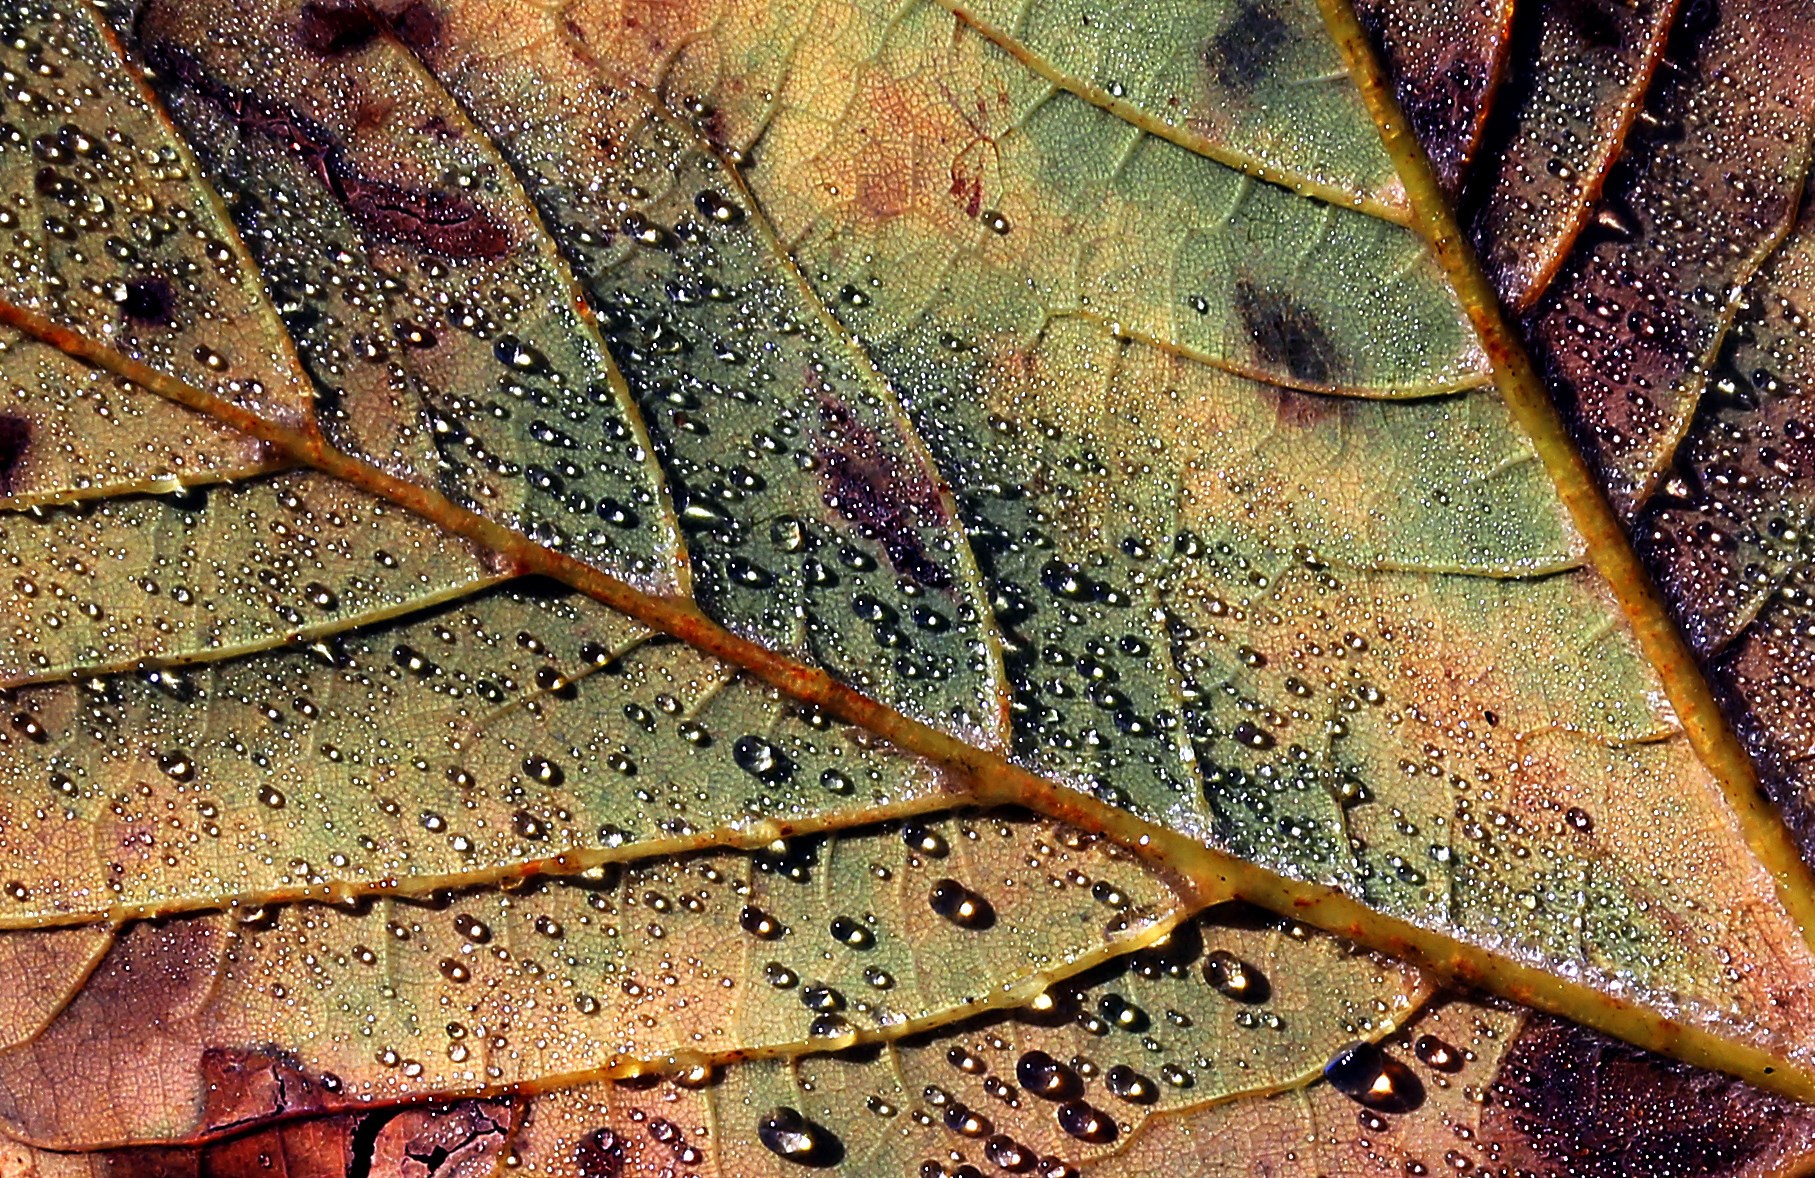 Scientists learn about condensation through plants. 